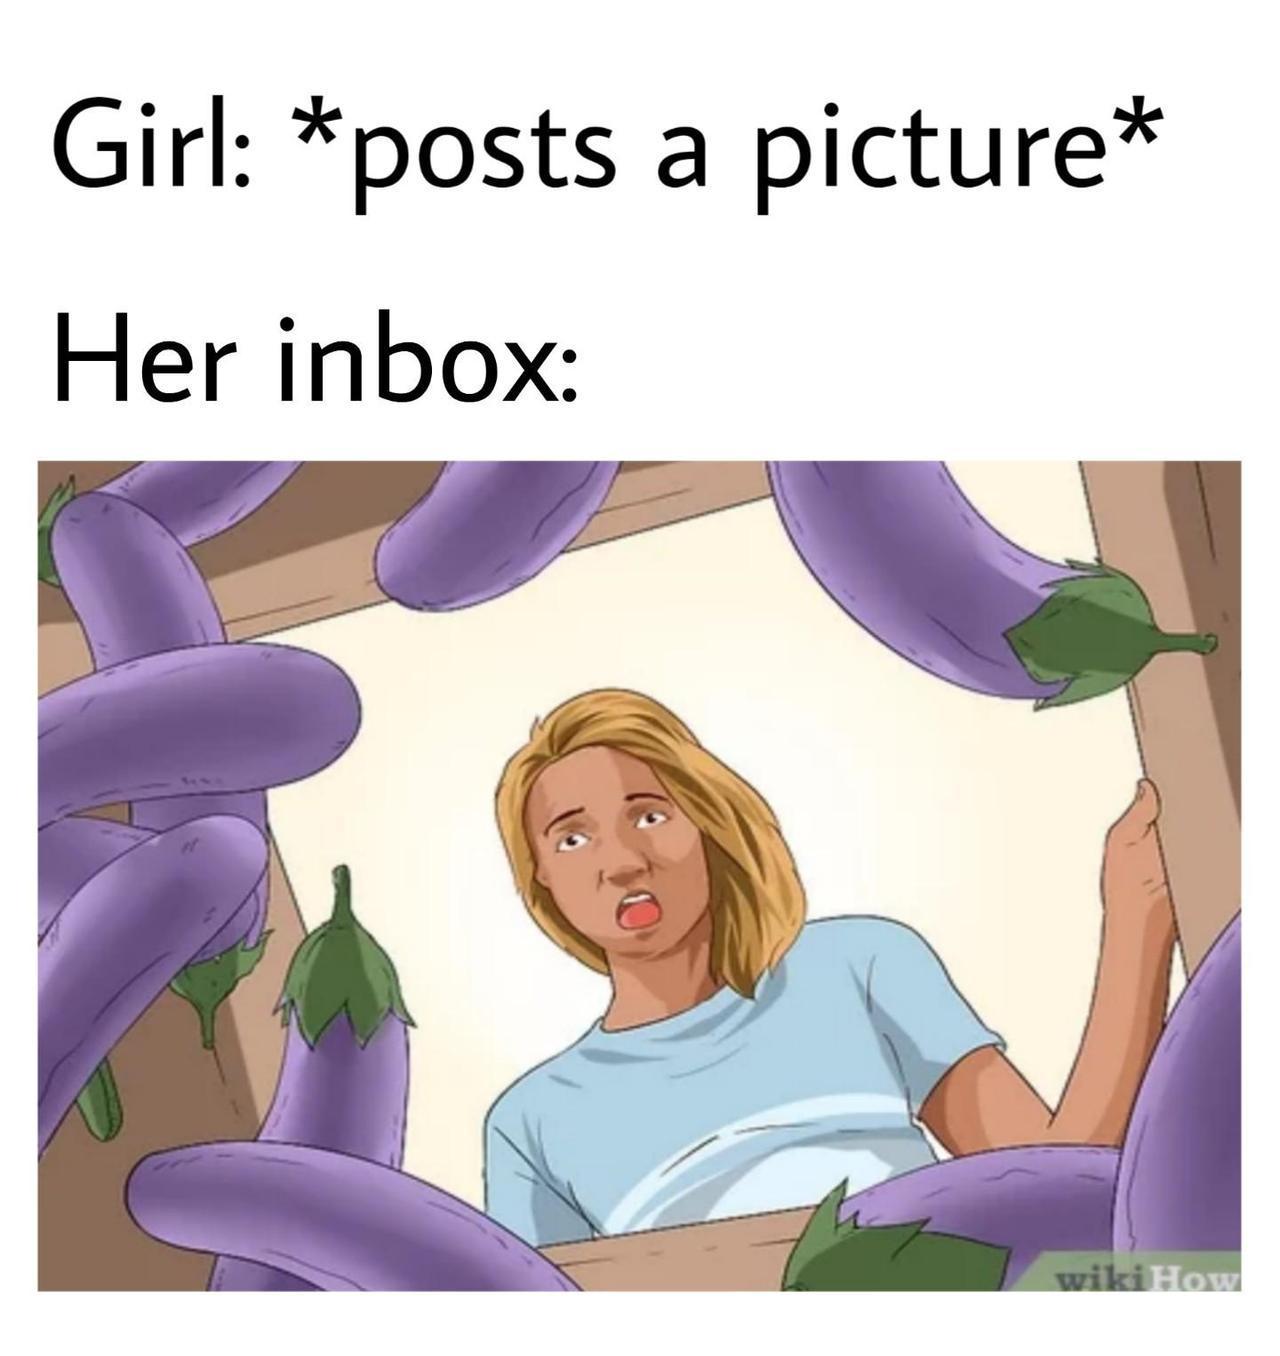 dank wikihow - Girl posts a picture Her inbox wikiHow